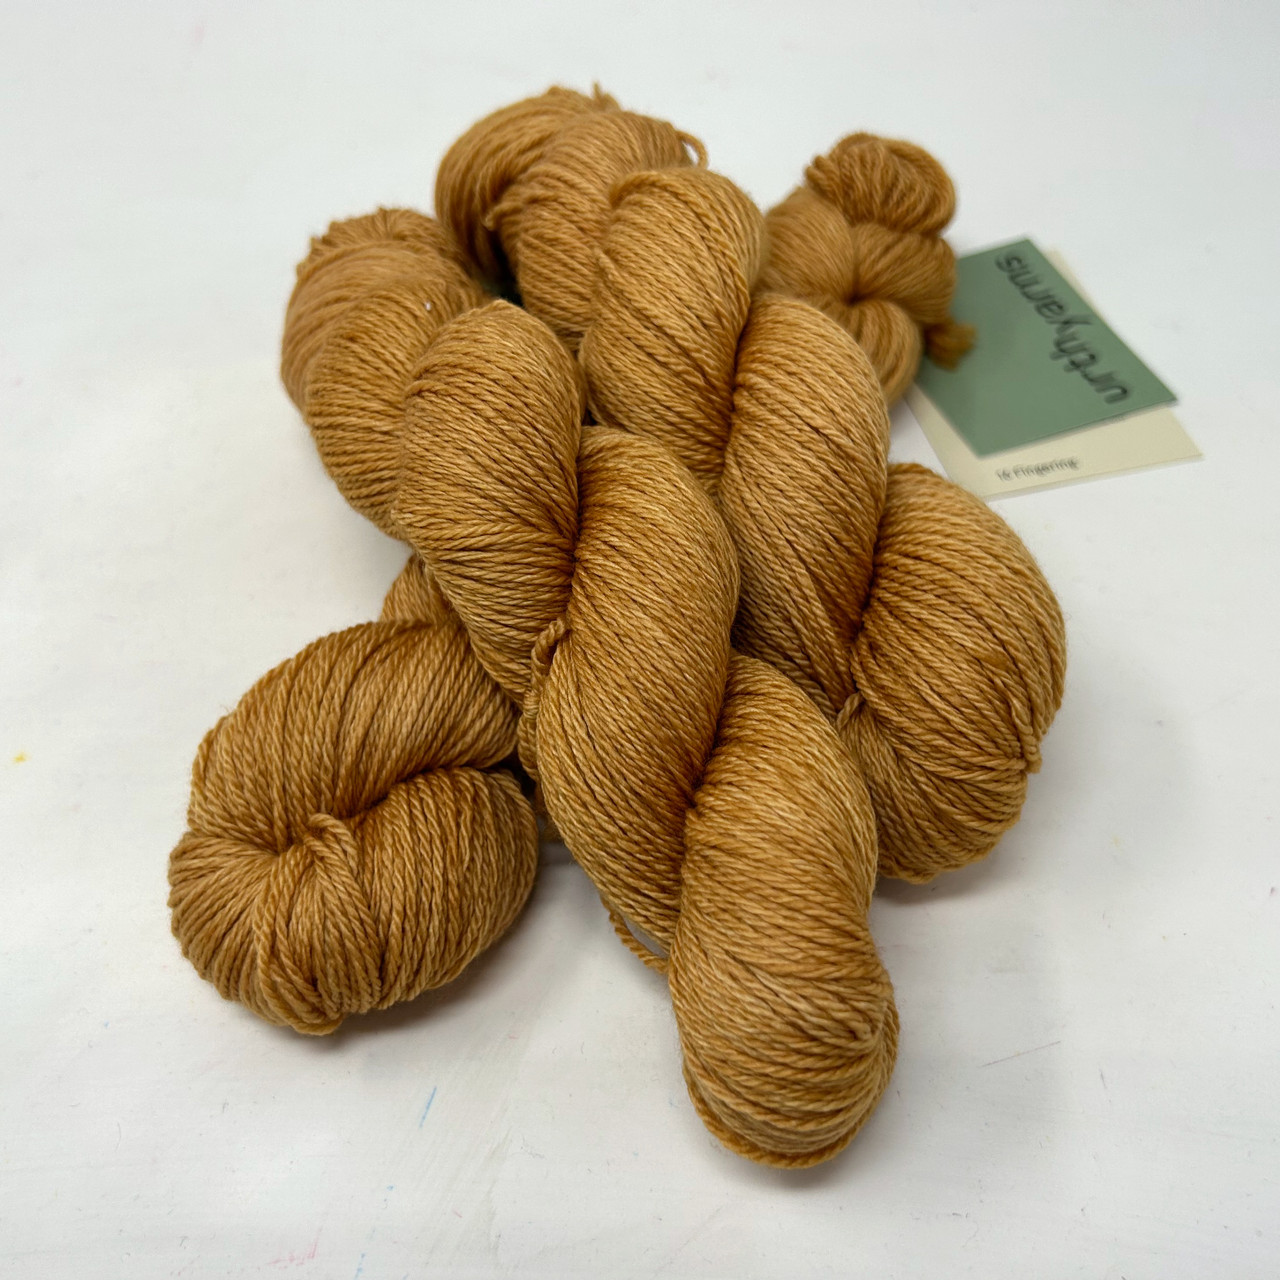 Harvest Fingering - CLEARANCE - Around the Table Yarns